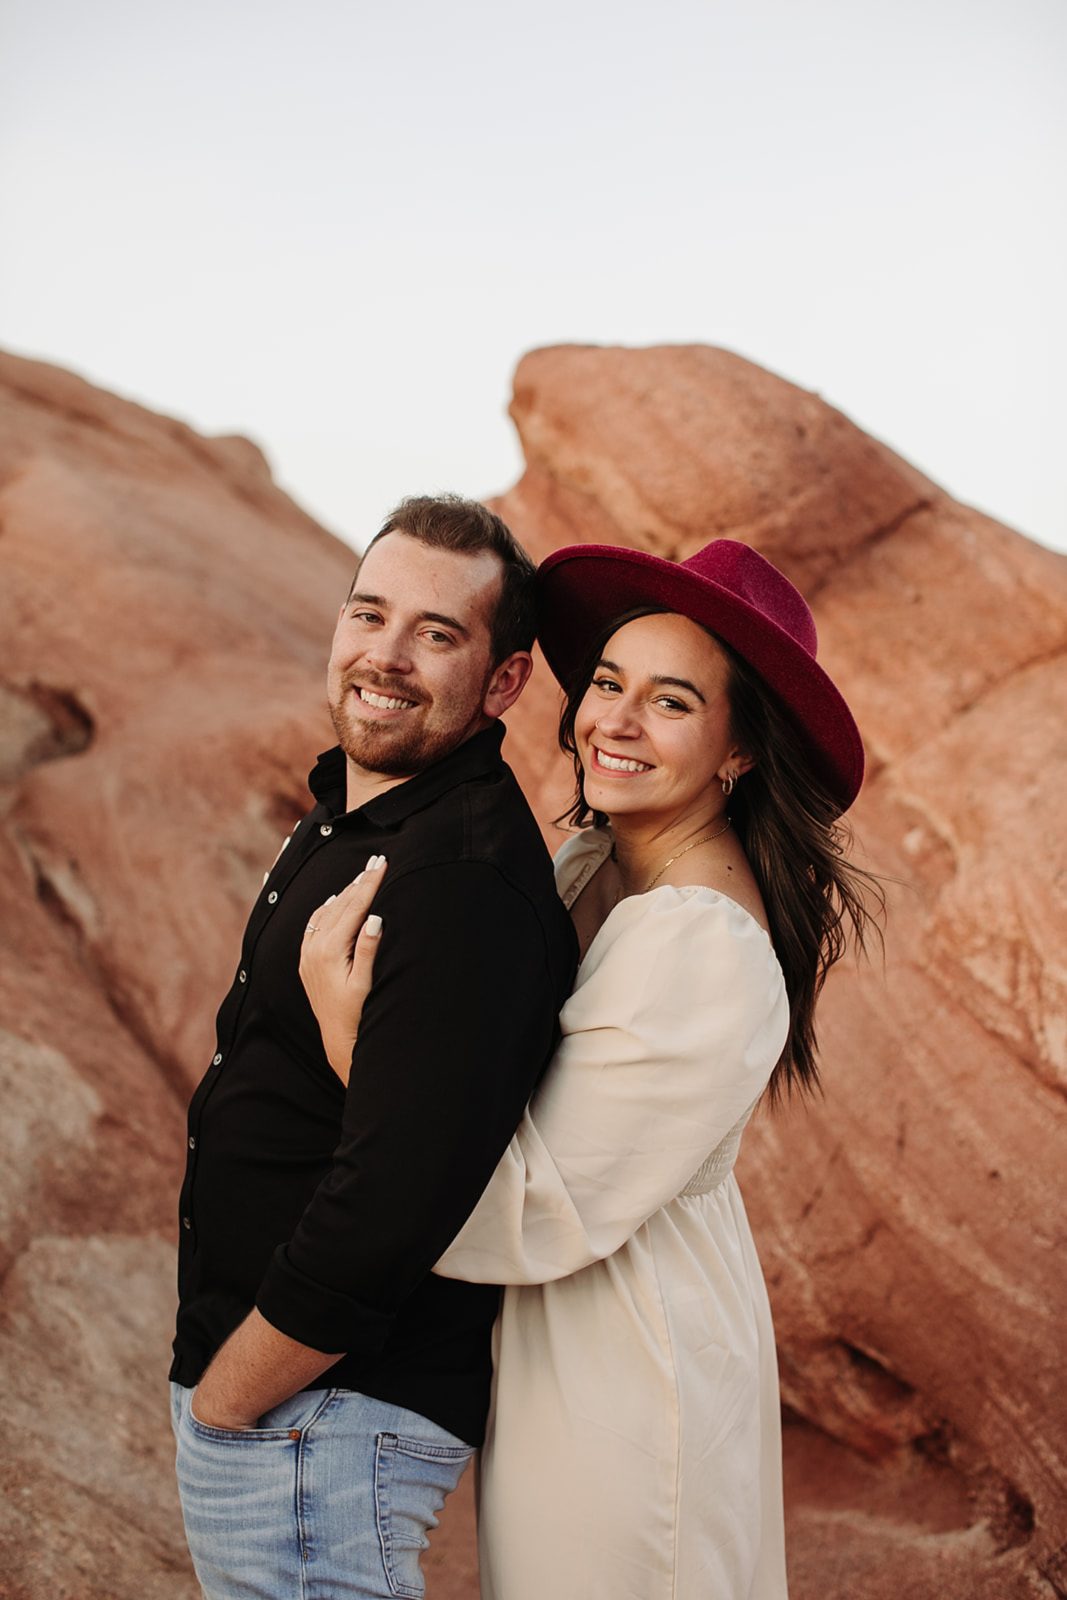 Garden of the Gods Engagement Photos, engagement session at garden of the gods, Colorado Springs engagement photos